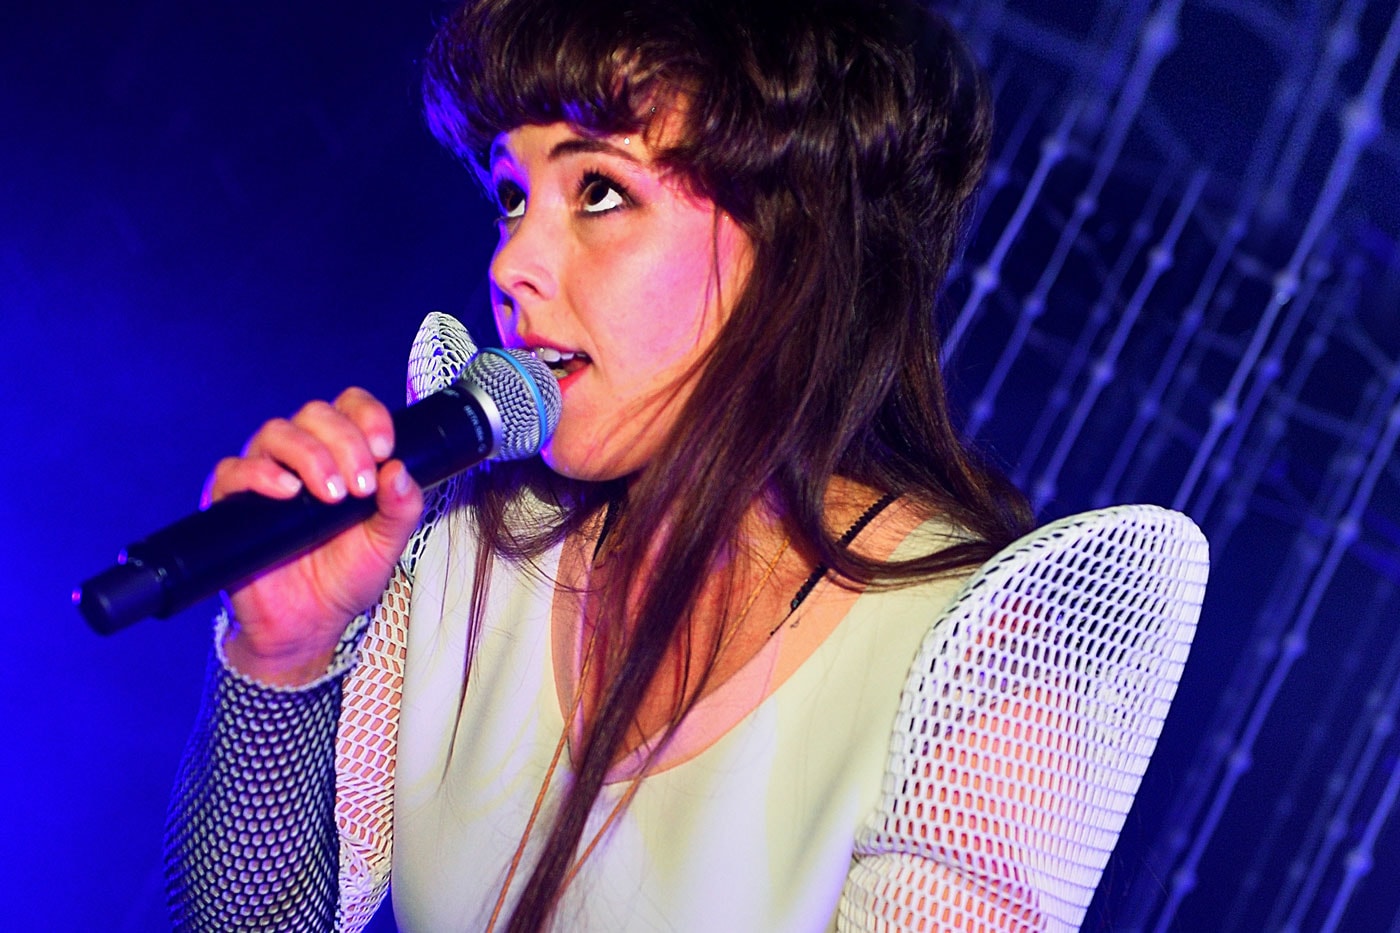 Watch Purity Ring Perform "Begin Again" on ' Jimmy Kimmel Live!'